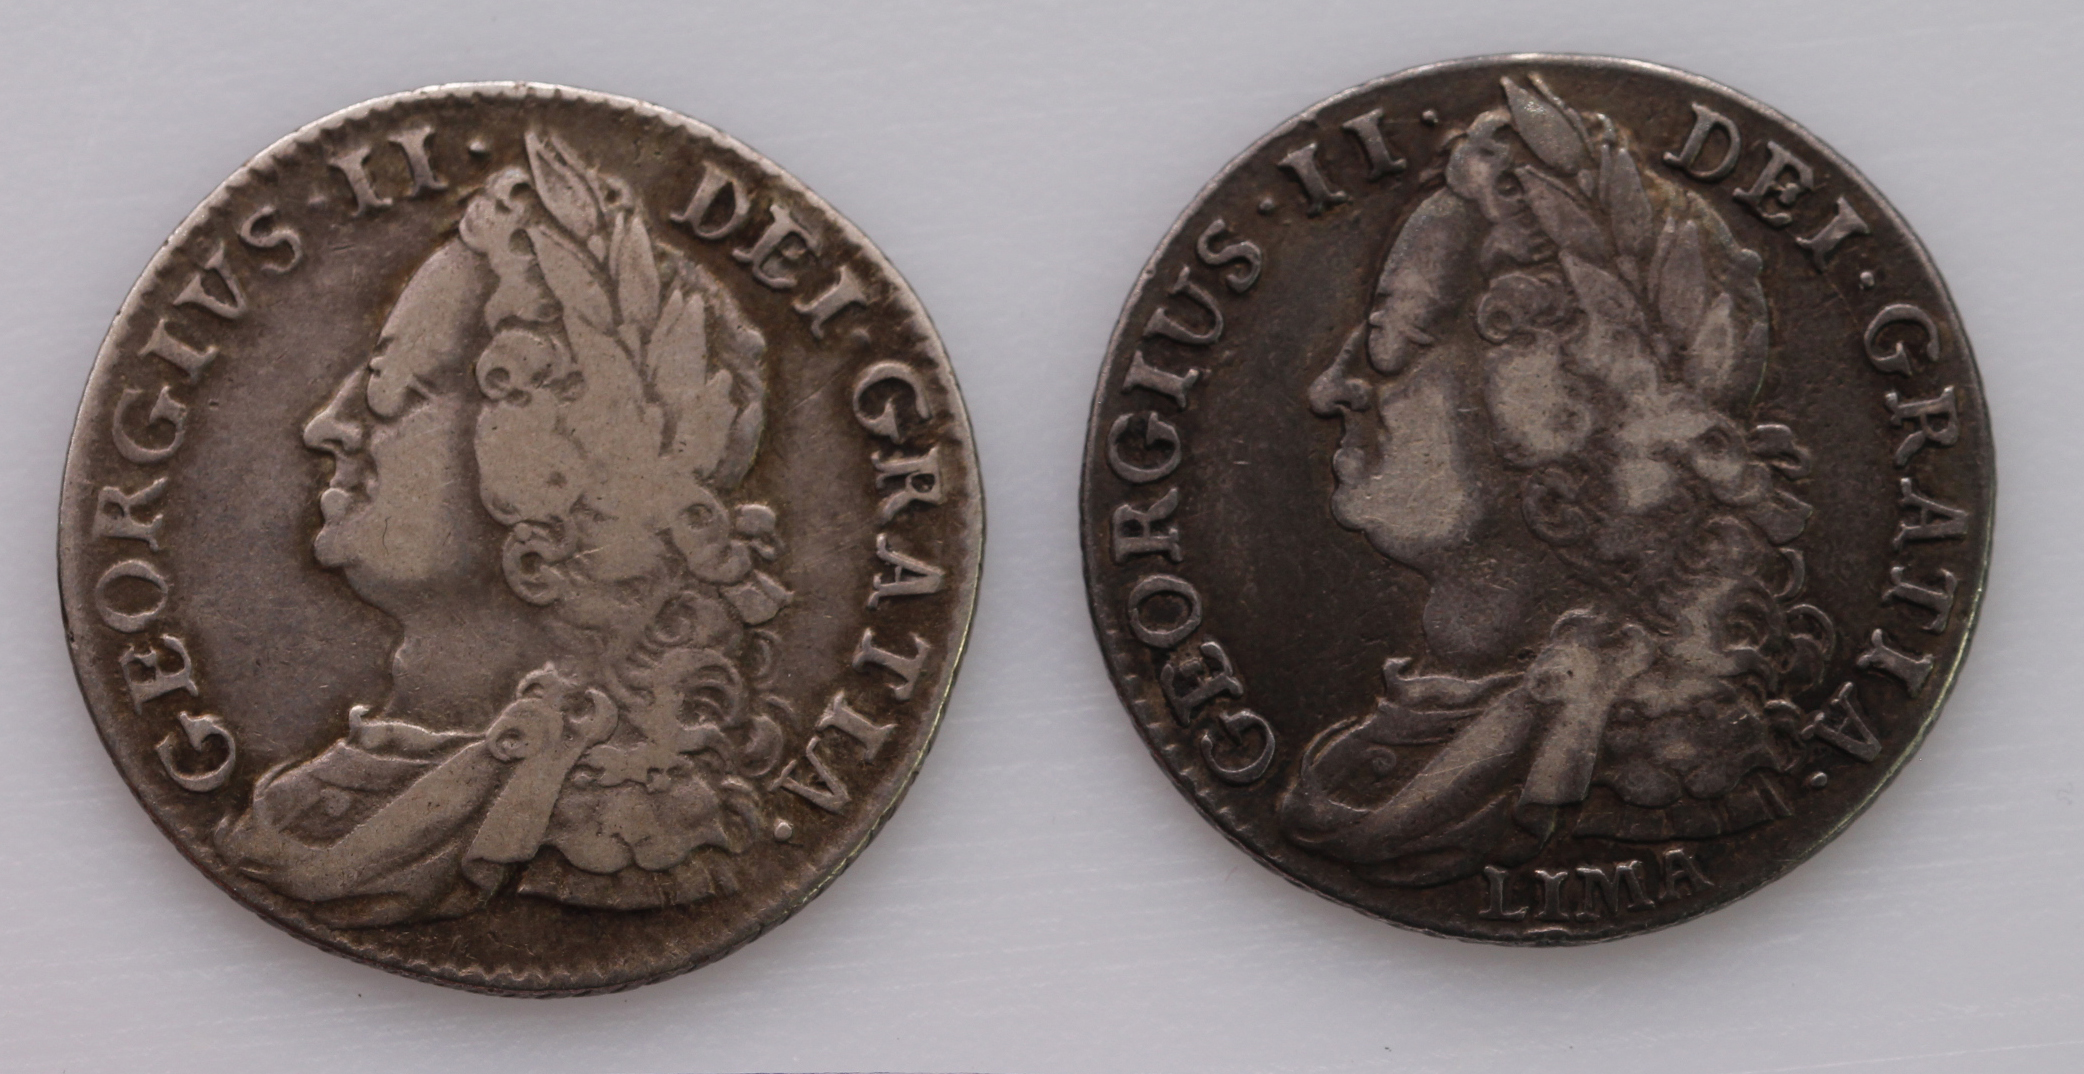 Shillings (2): 1745 LIMA S.3703 GF, and 1750 small 0, S.3704, Fine.